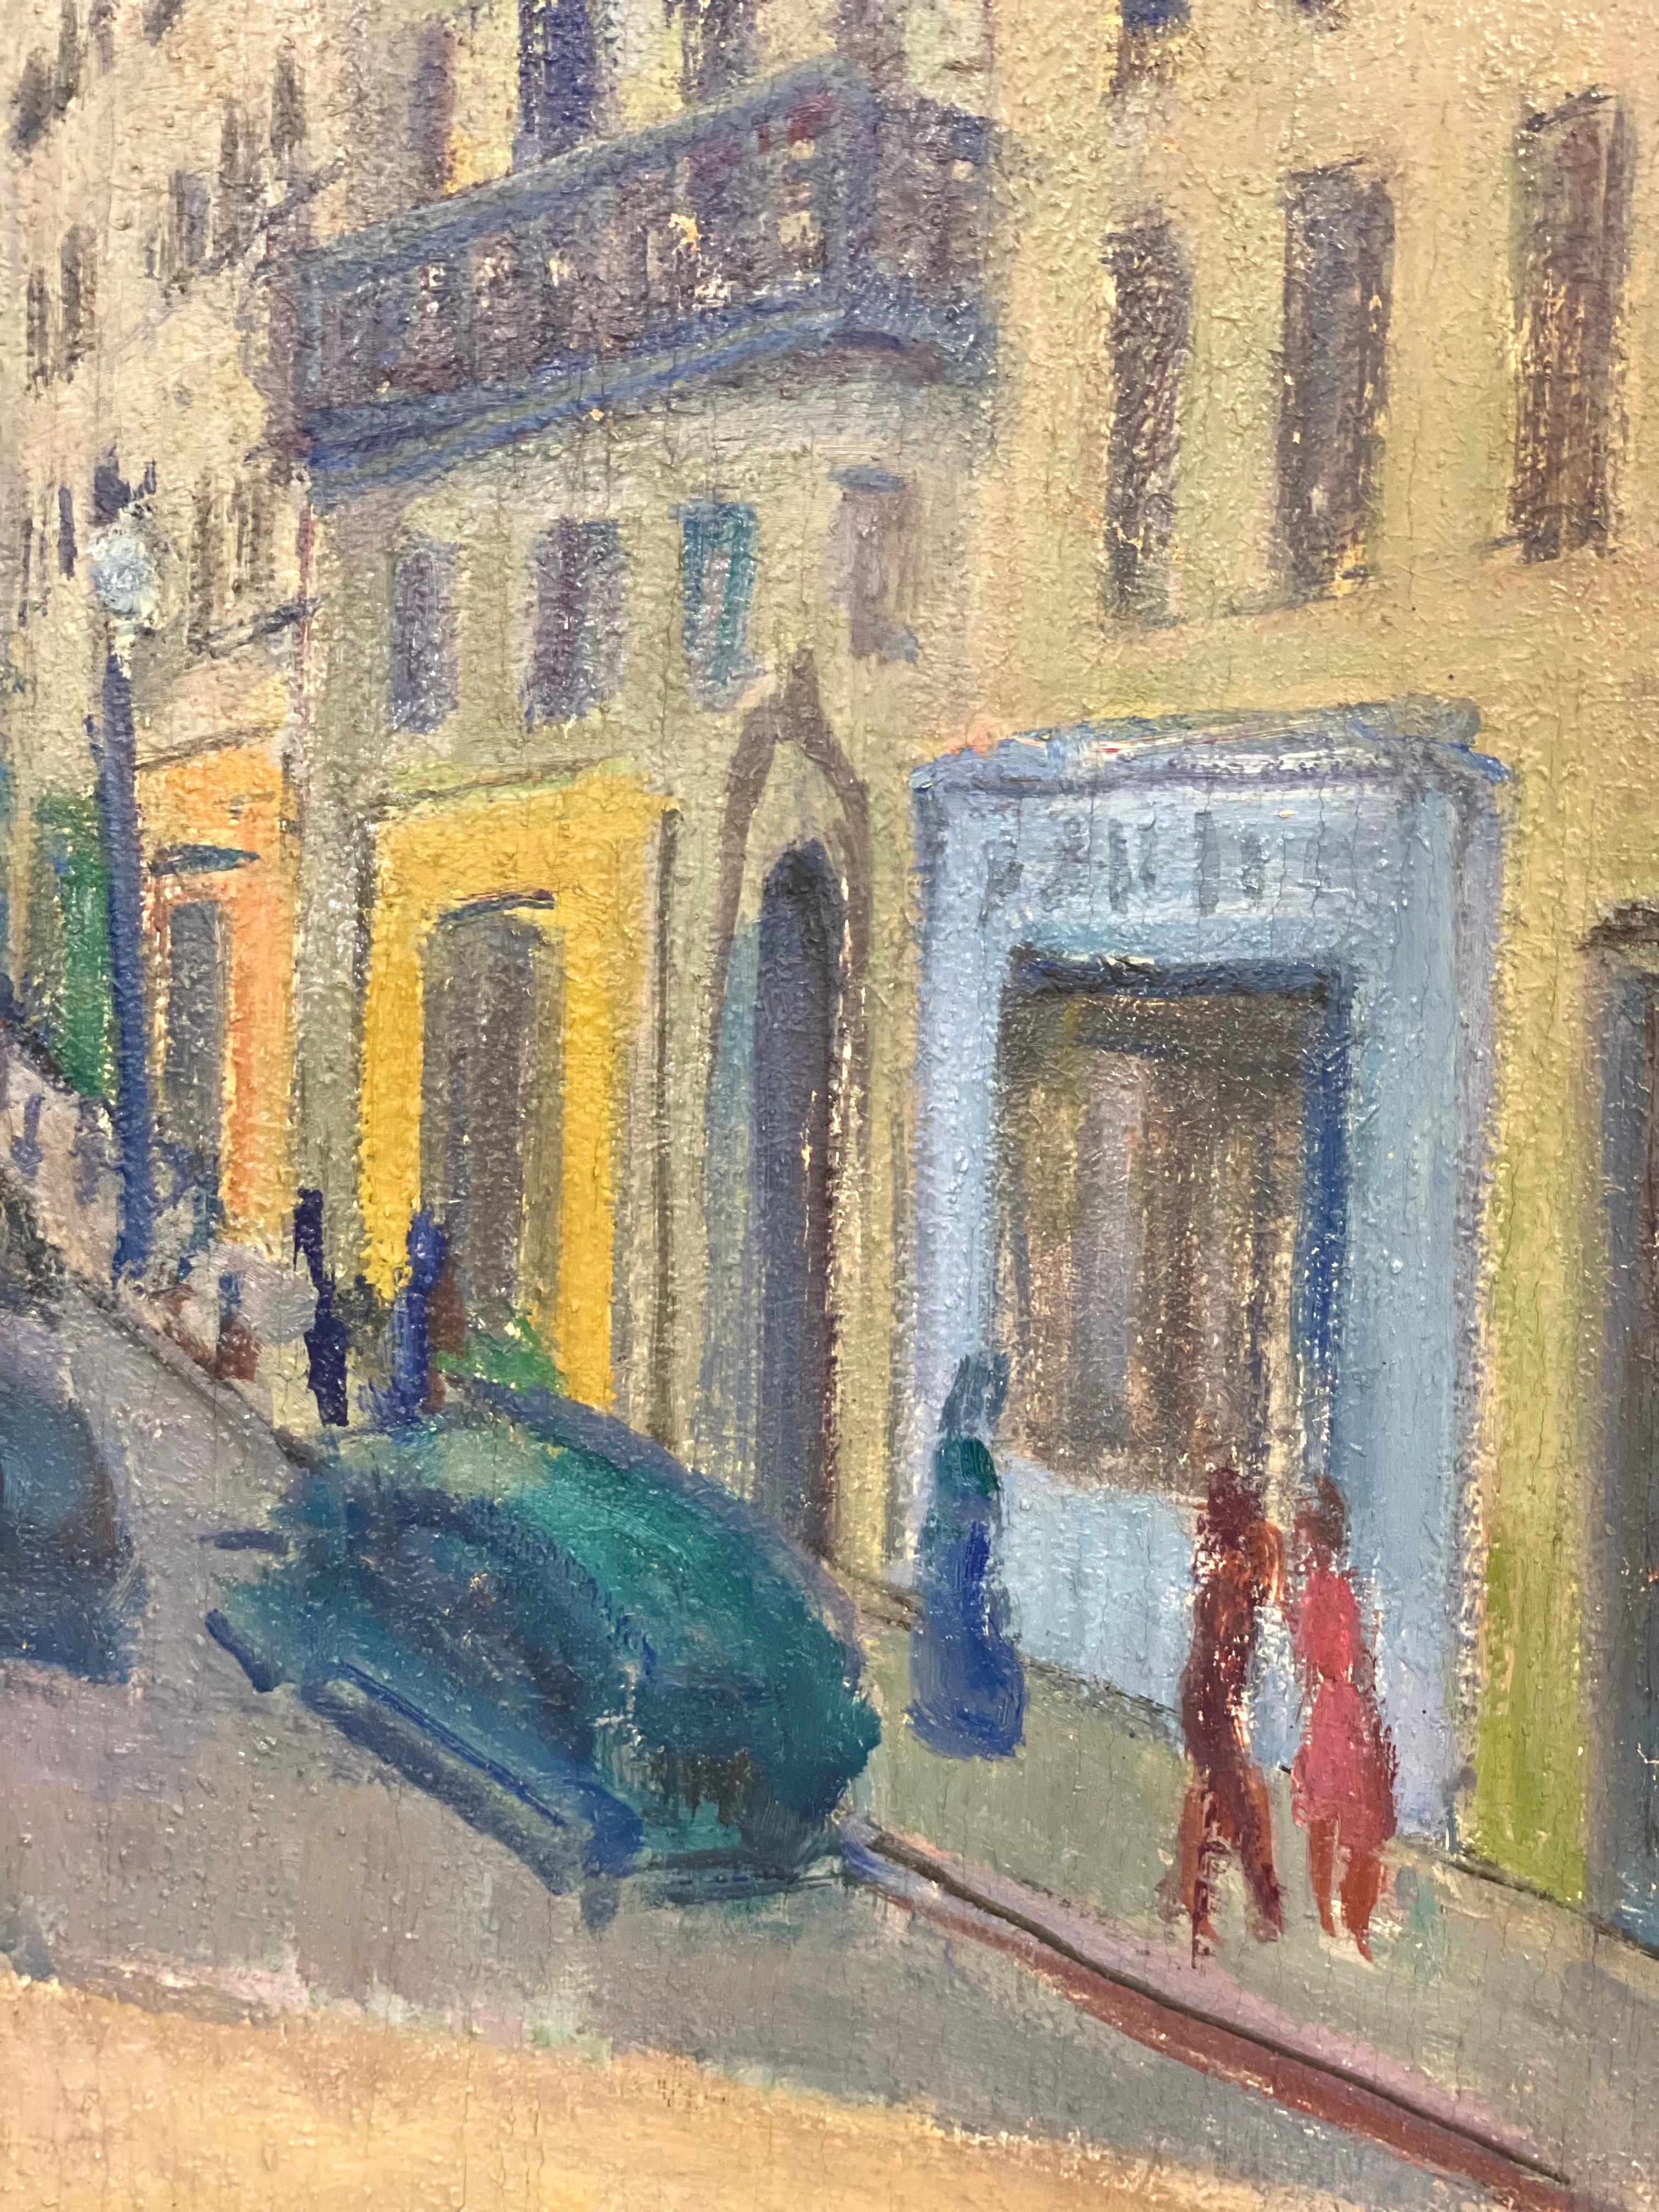 Oil on canvas: A vibrant street scene of “Paris, Montmartre”, by Marseille artist Louis Audibert (1880-1983). 
Depicting a typical Parisian street, lined with residential apartments above colourful shopfronts, the gleaming white domes of the Sacré